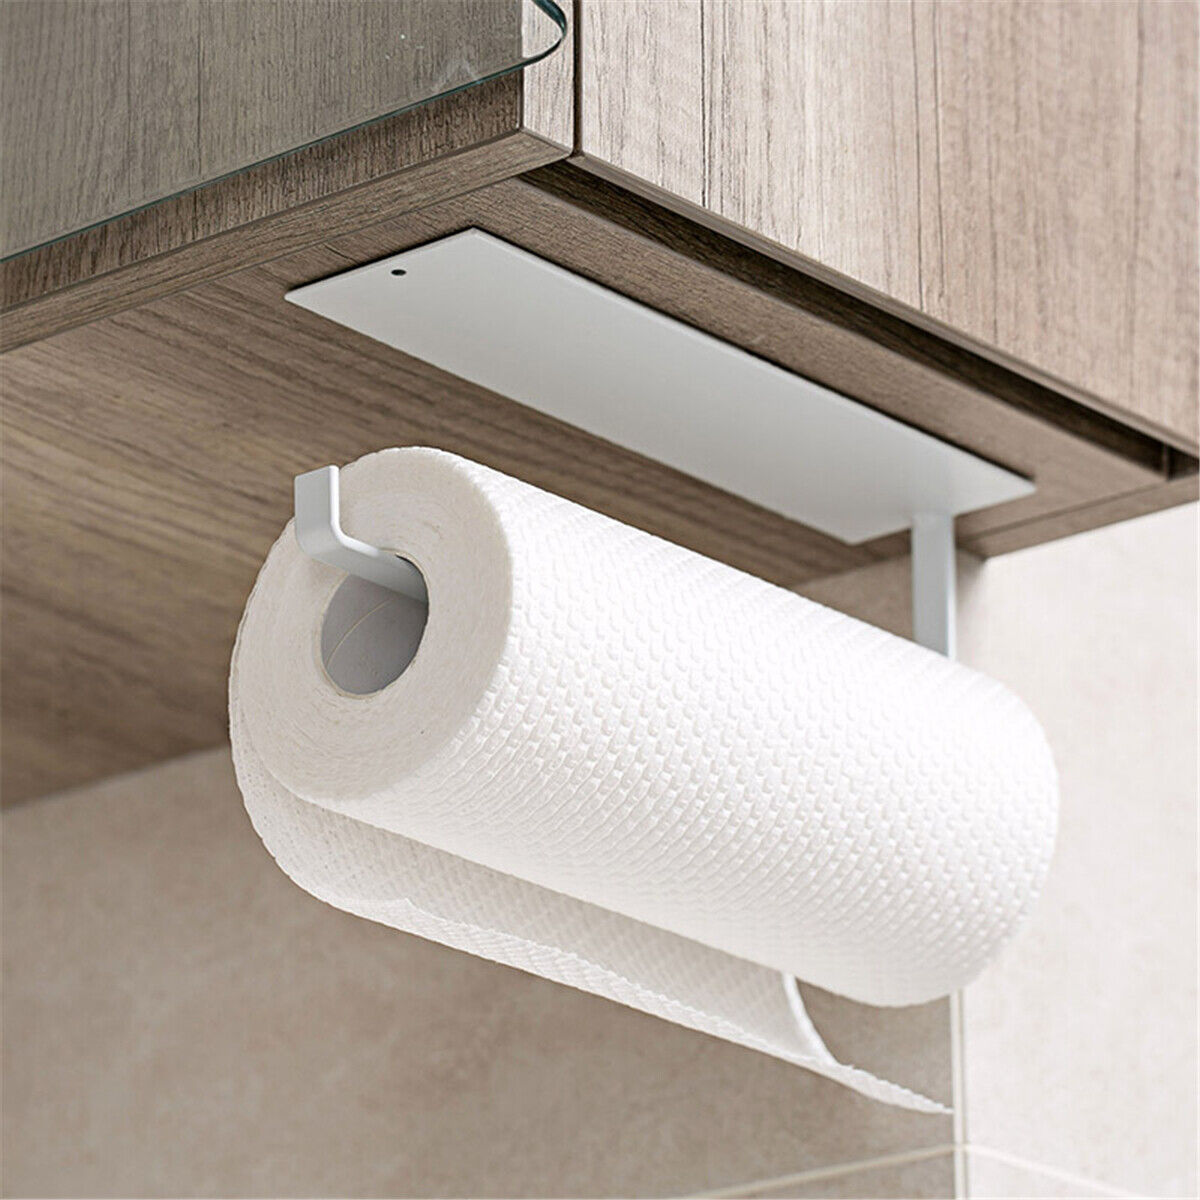 Stainless Steel Adhesive Paper Towel Holder Under Cabinet Wall